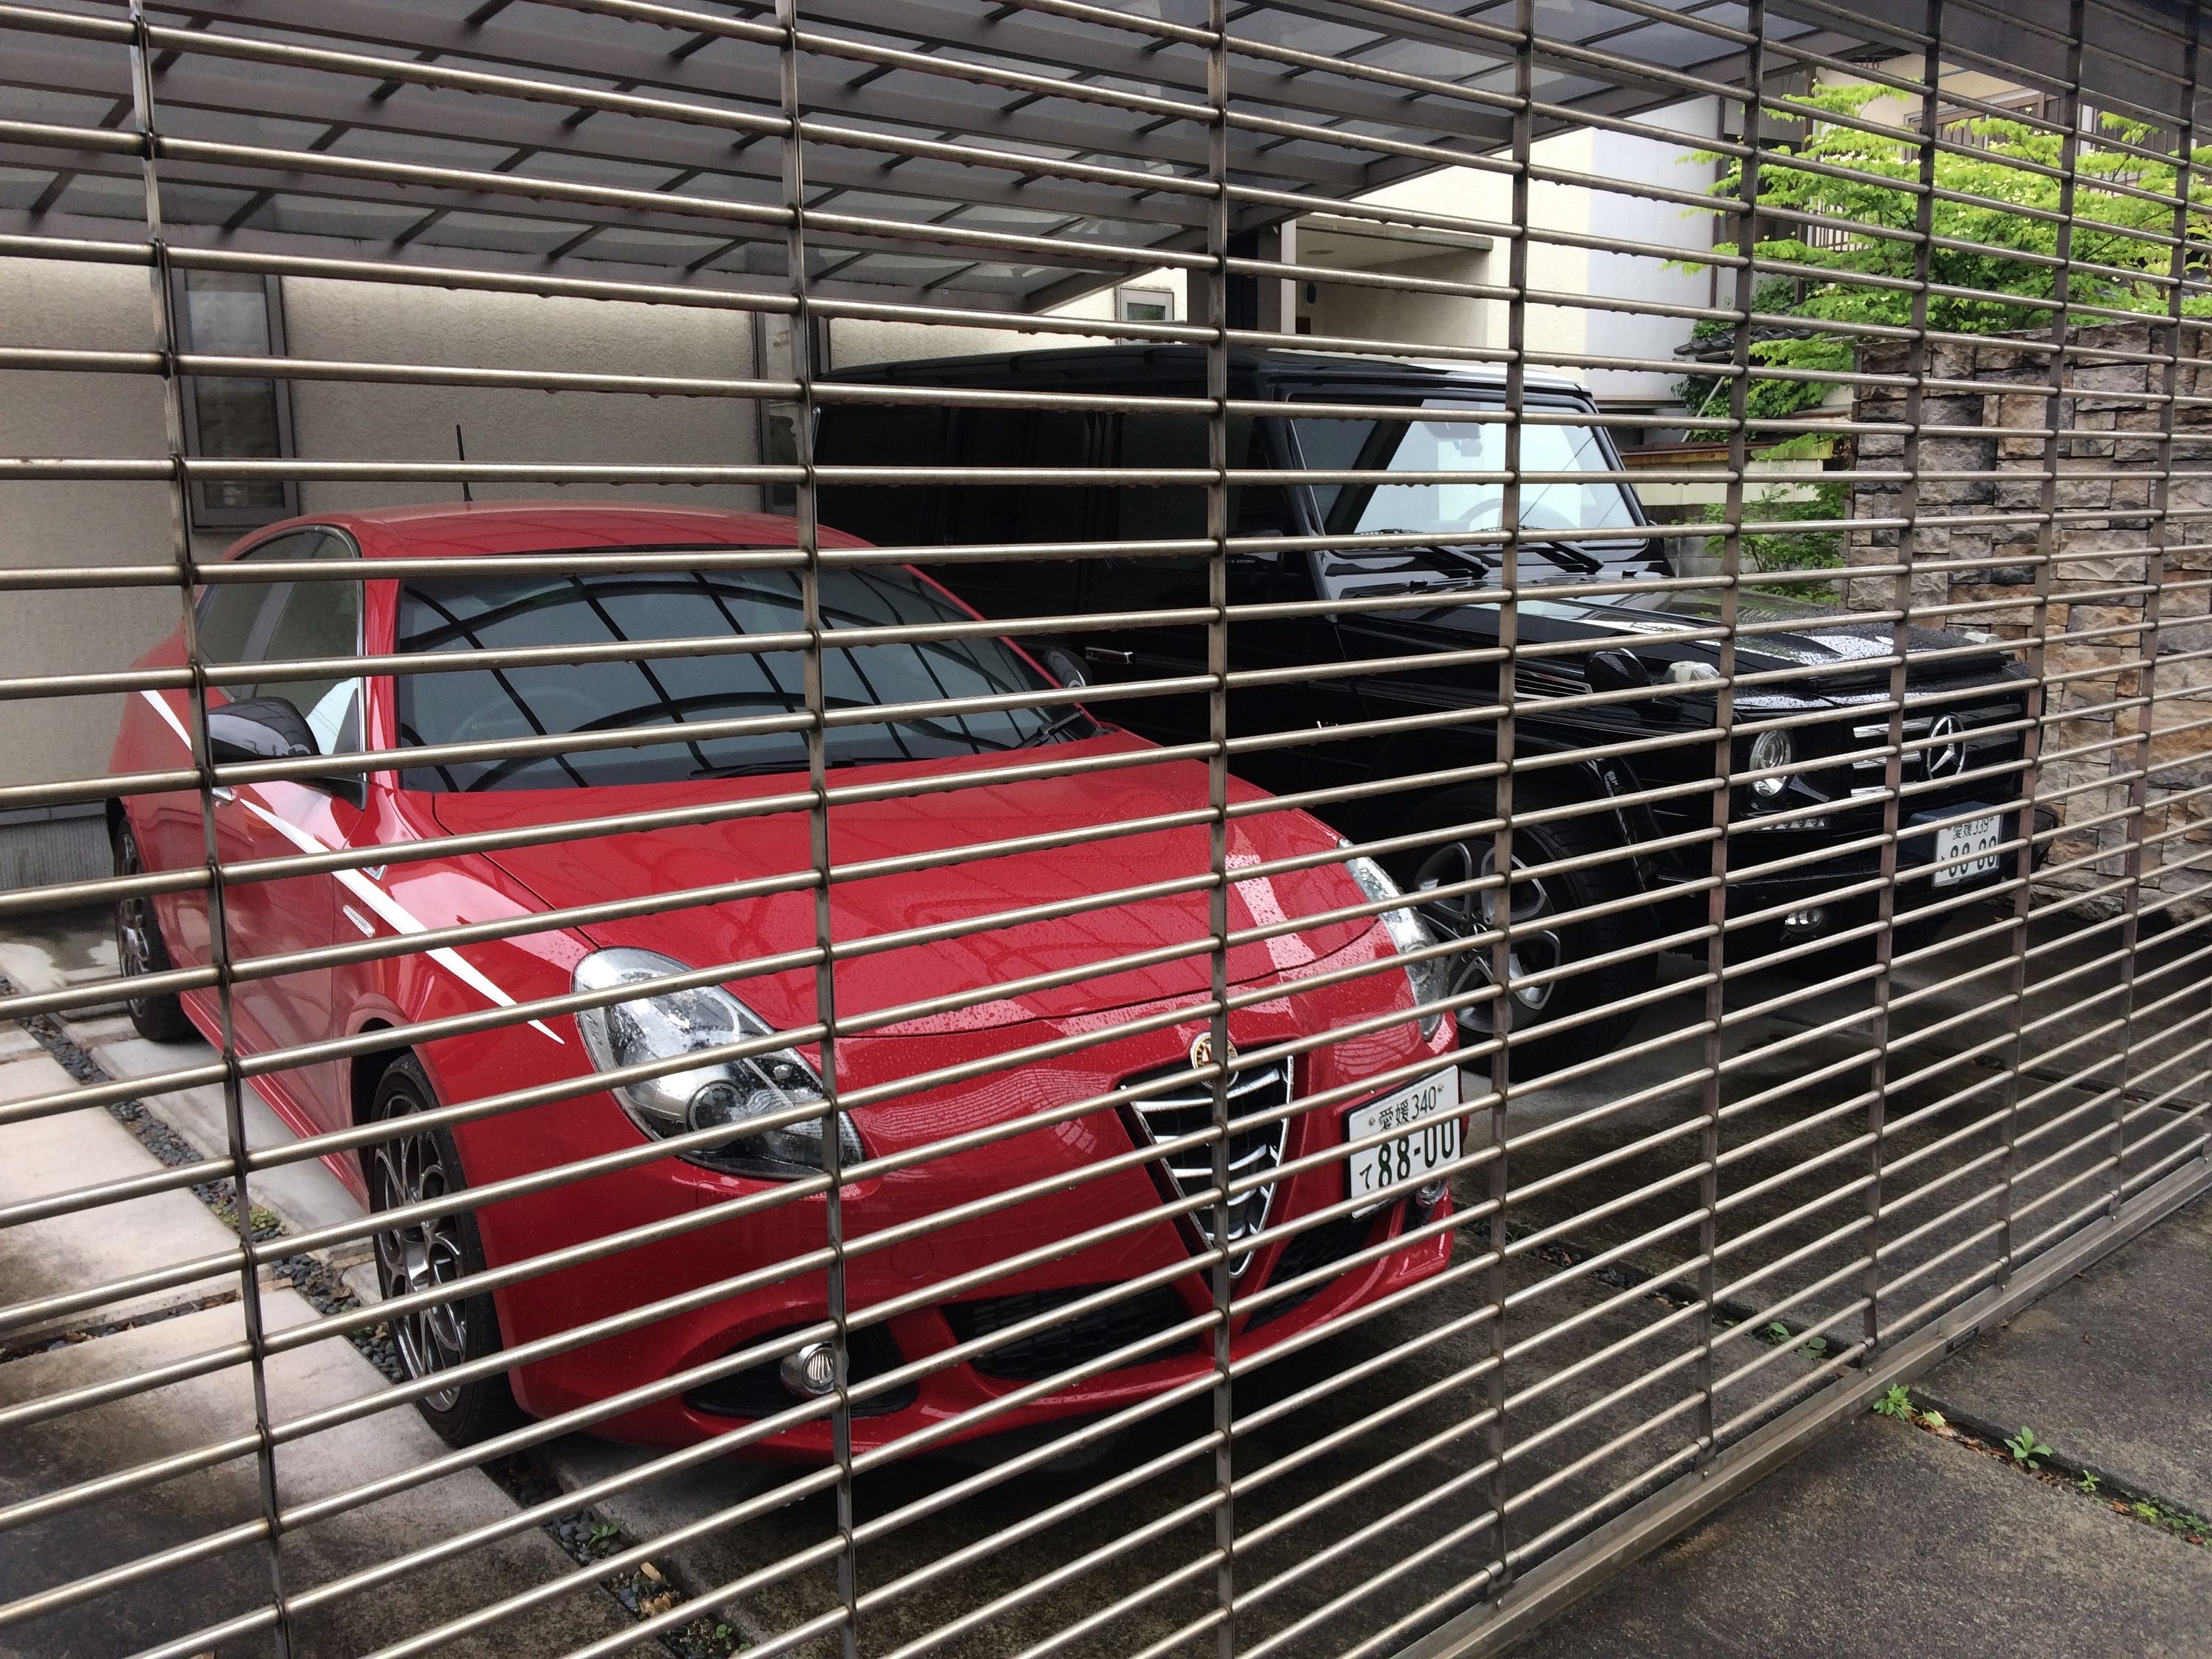 A red Alfa Romeo and a black Mercedes-Benz G-Wagen parked in a driveway behind a grate.